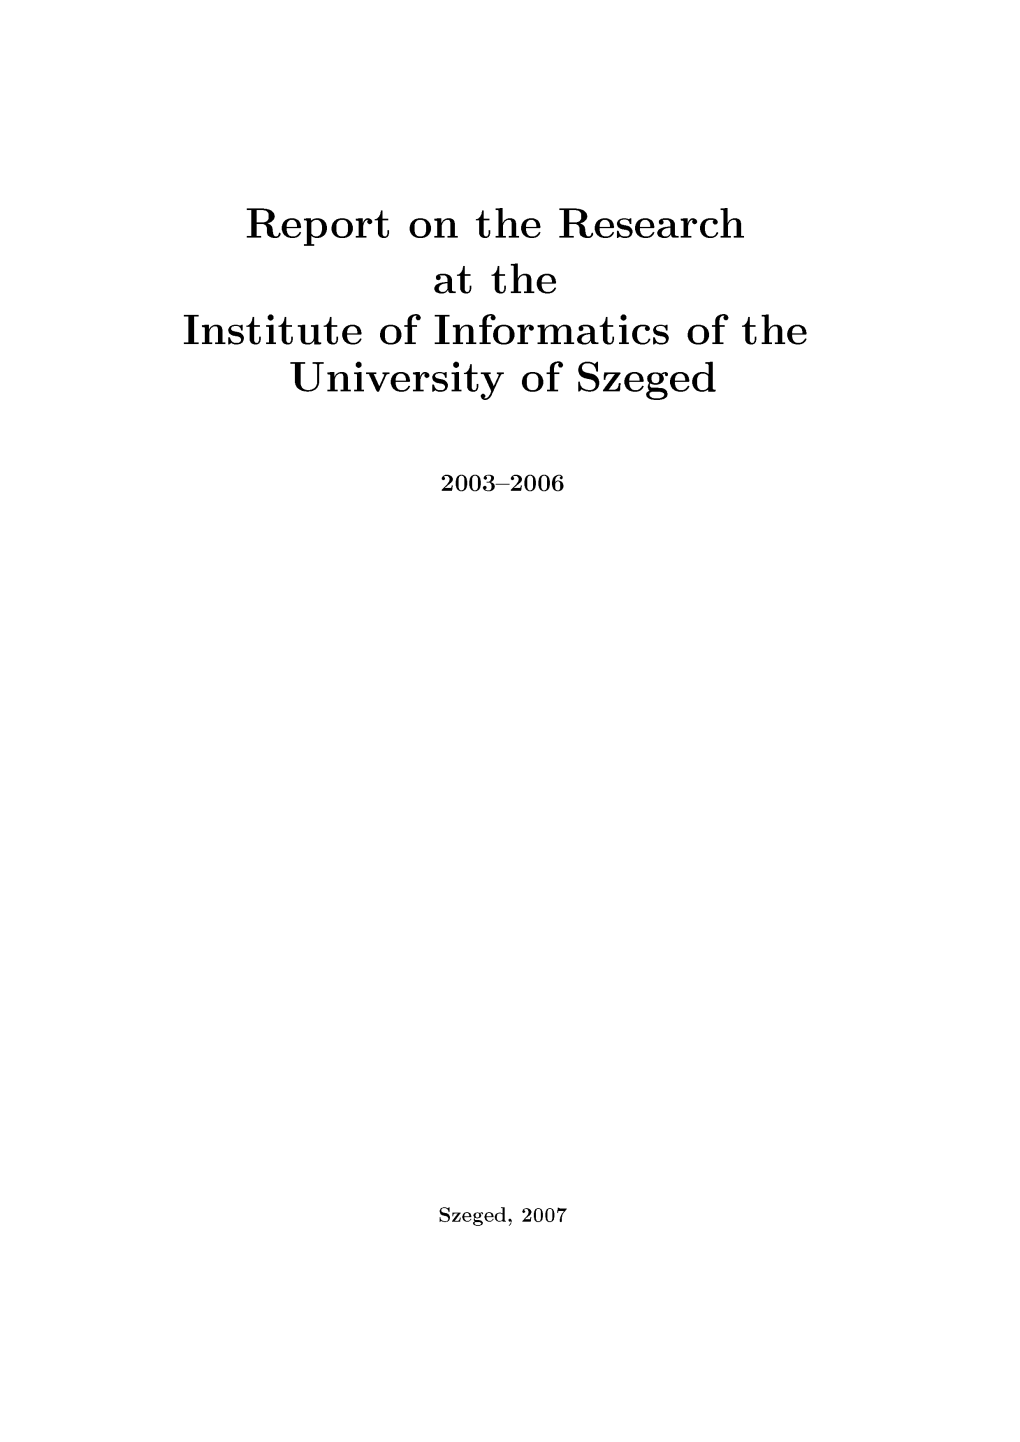 Report on the Research at the Institute of Informatics of the University of Szeged